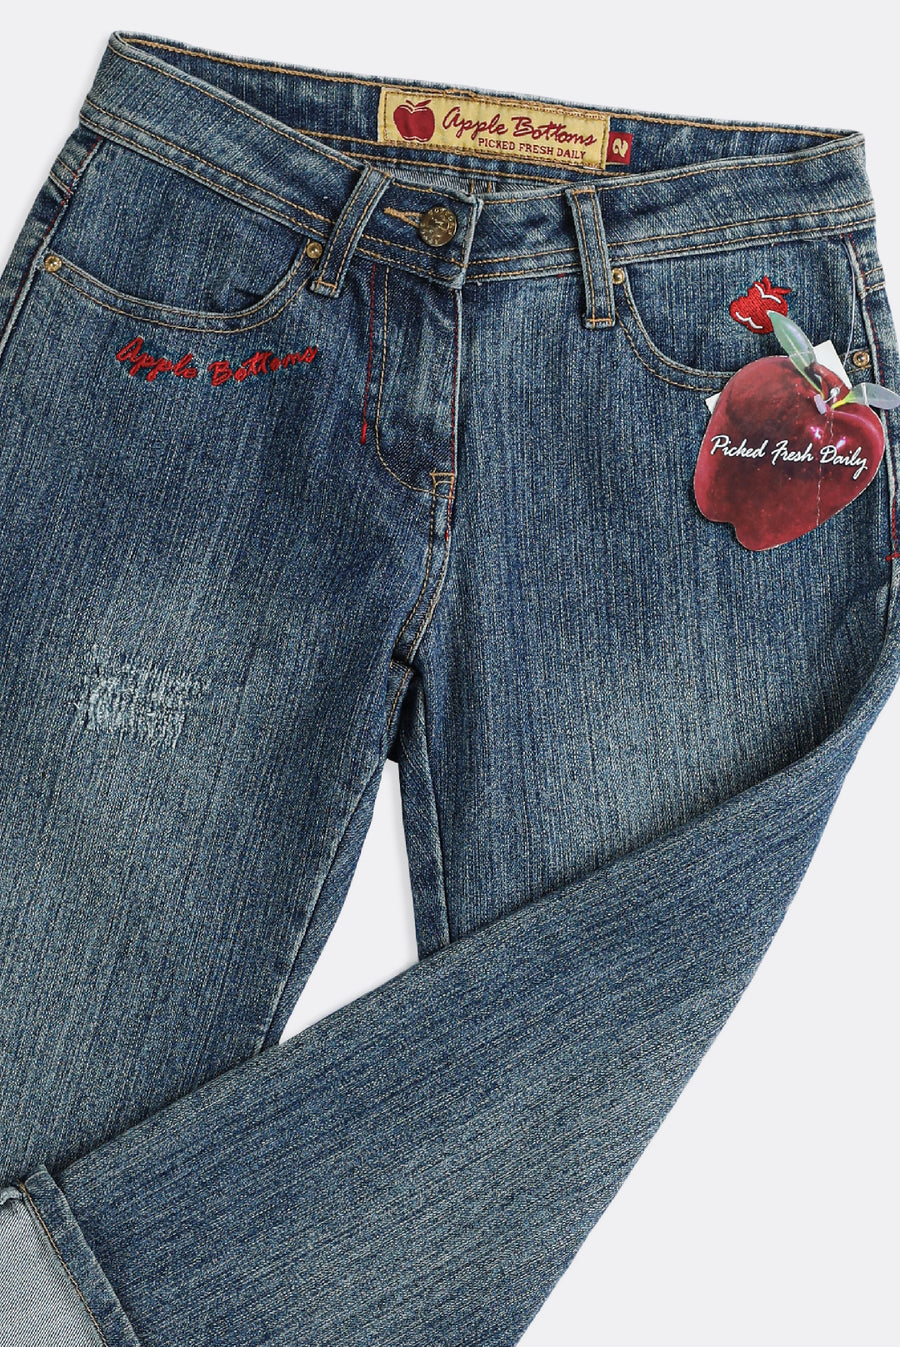 Deadstock Apple Bottom Gold and Red Embroidered Denim Capris - W27